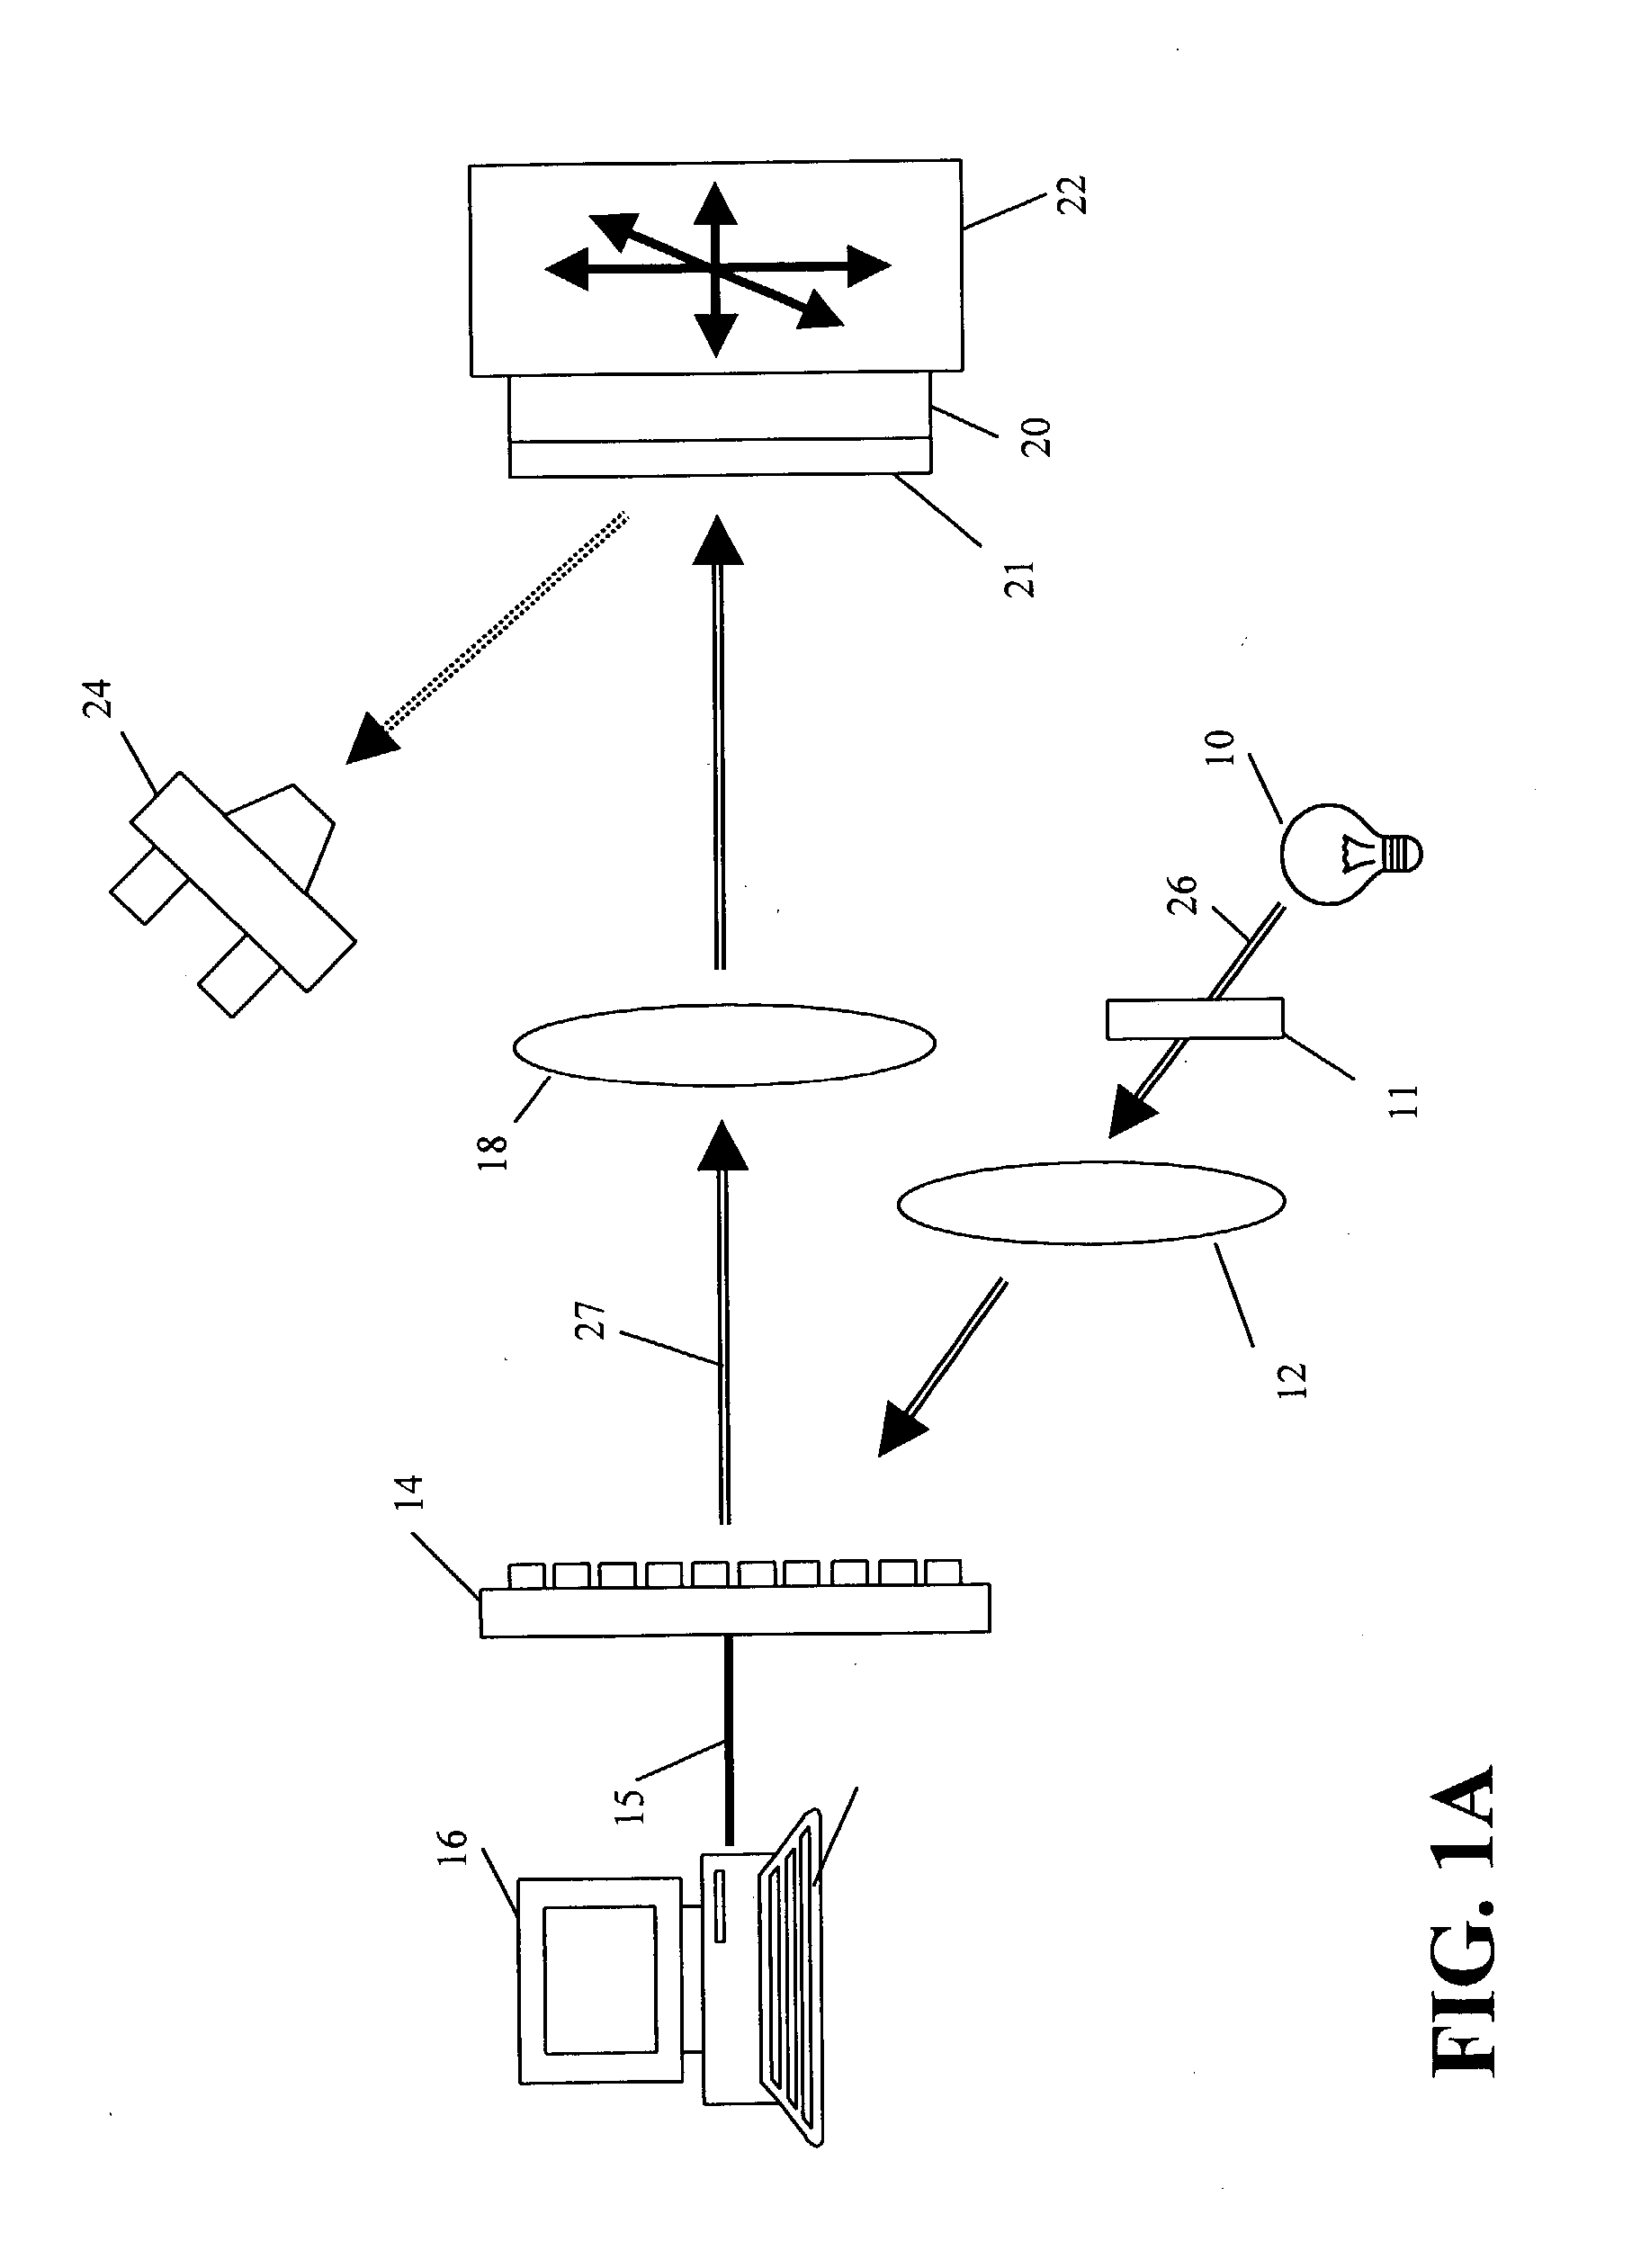 Method and apparatus for maskless photolithography